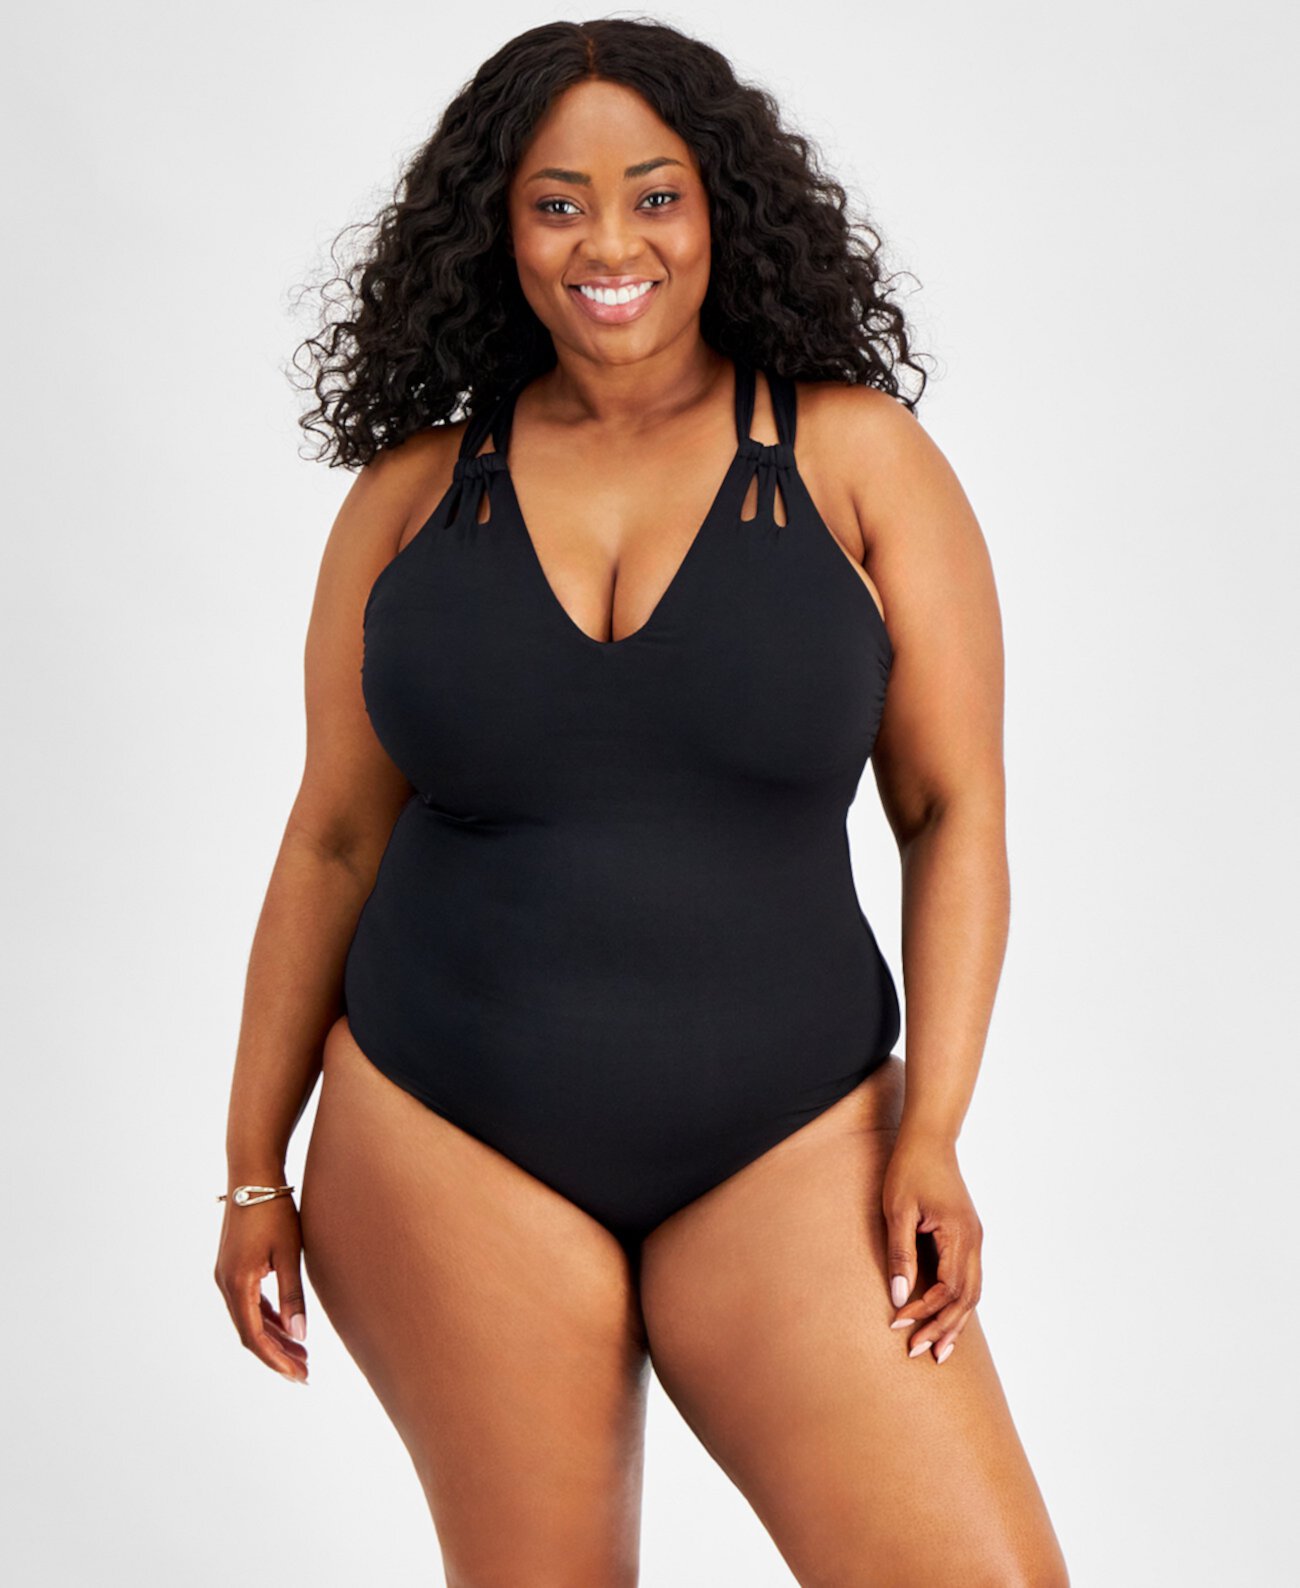 Plus Size Color Code Strappy One-Piece Swimsuit Becca ETC